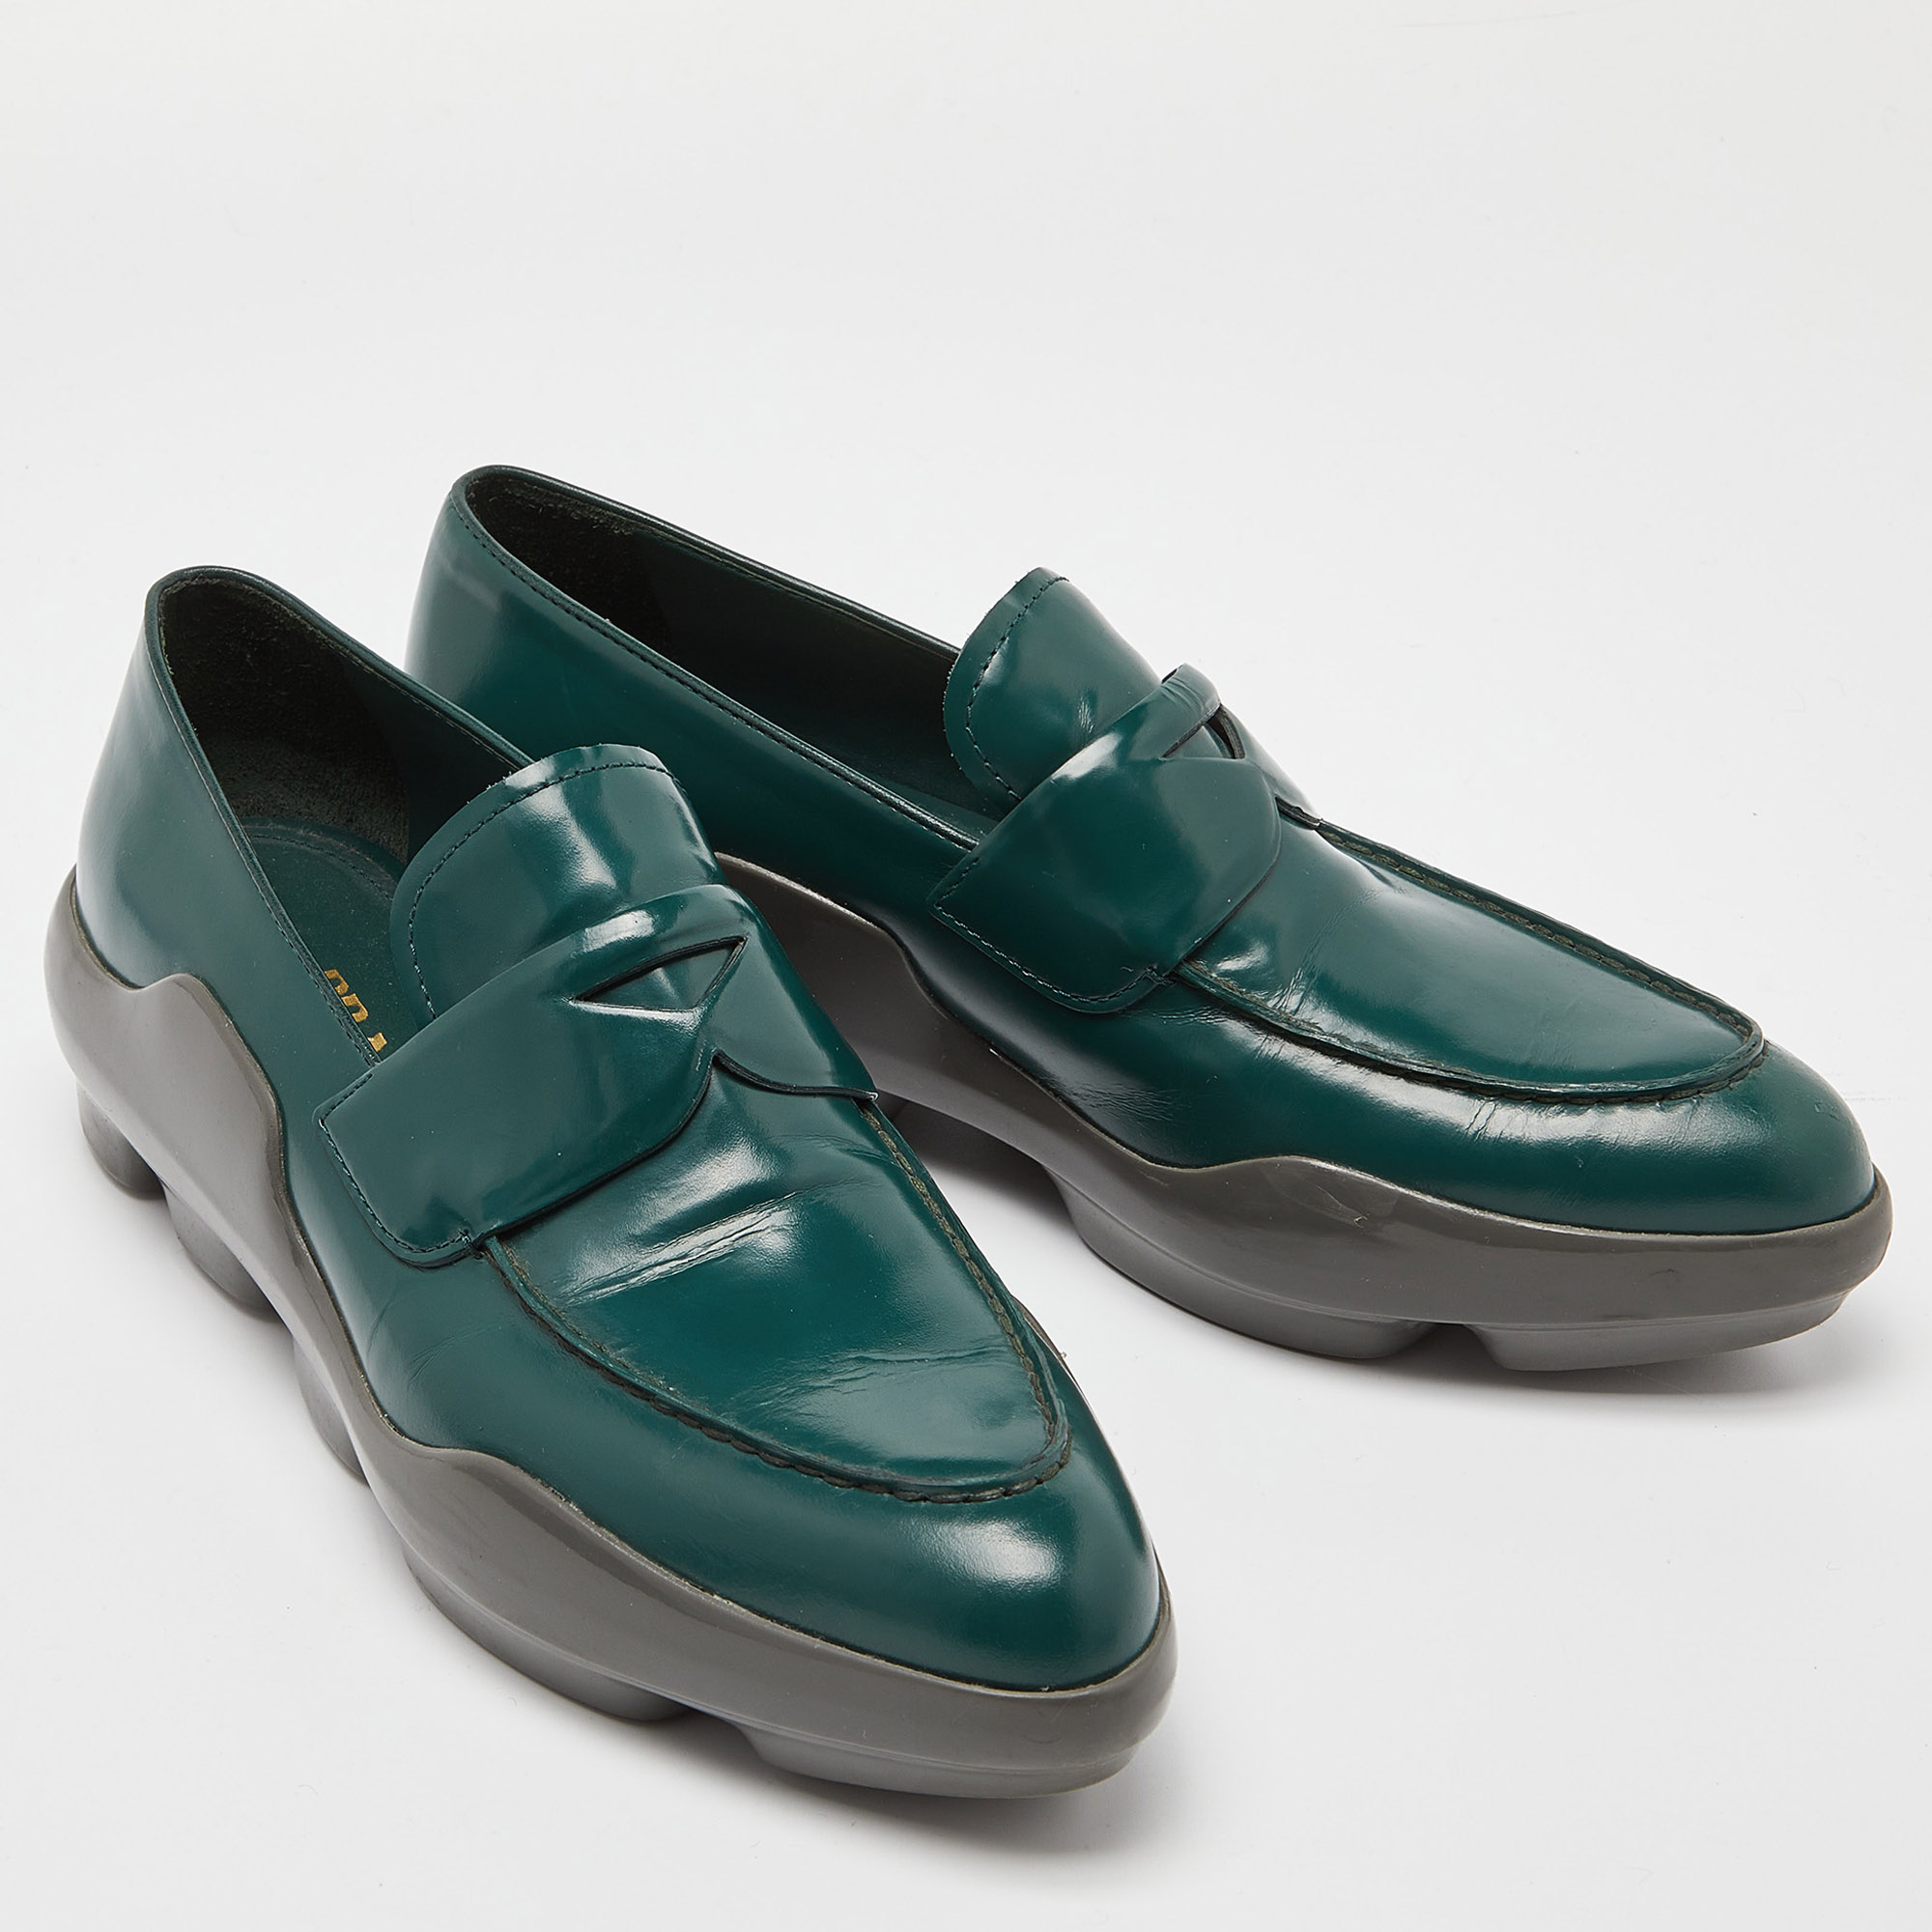 Prada Green/Grey Leather And Rubber Penny Platform Loafers 39.5